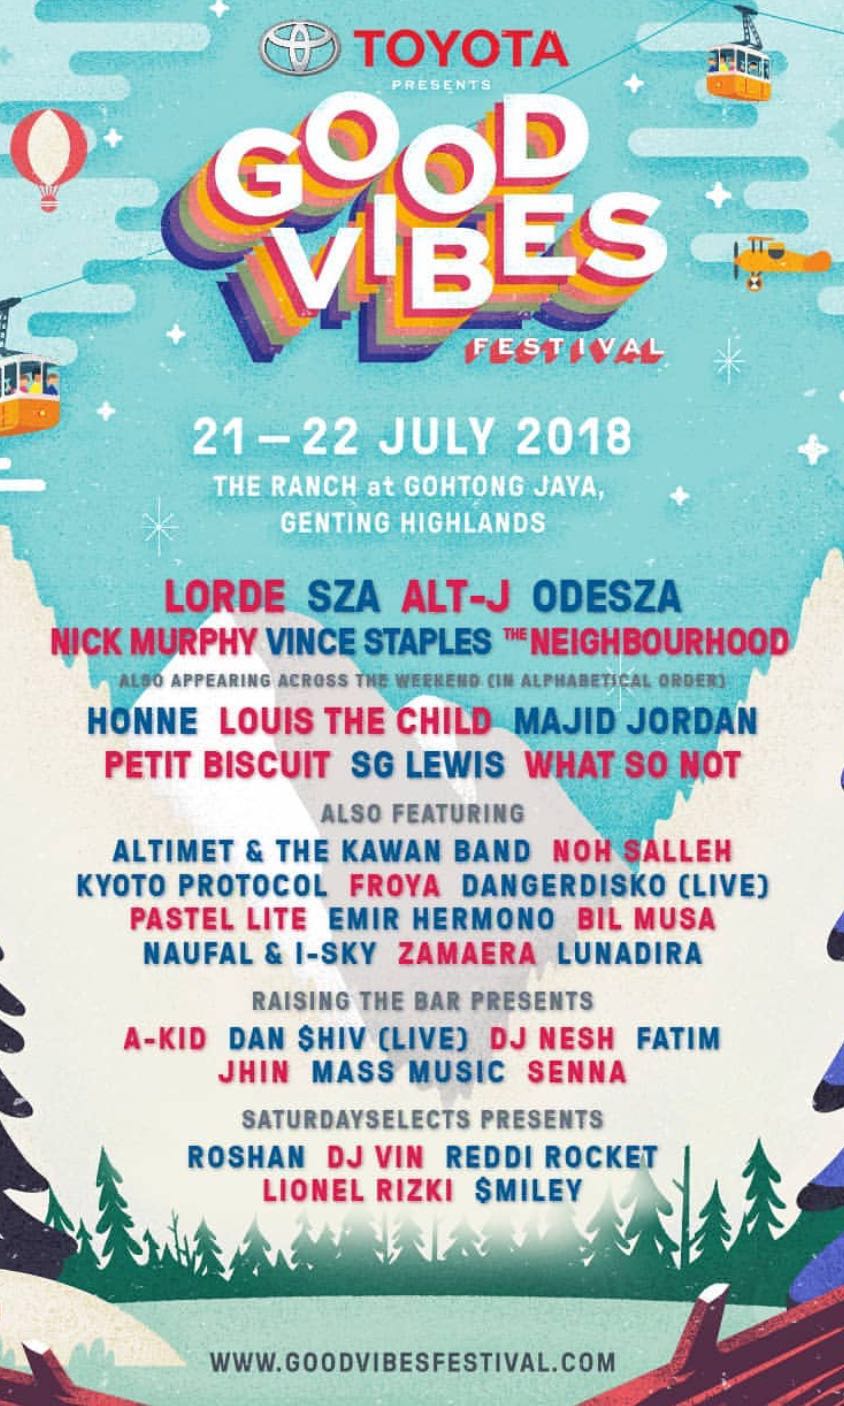 Good vibes festival 2018, Tickets & Vouchers, Local Attractions and  Transport on Carousell